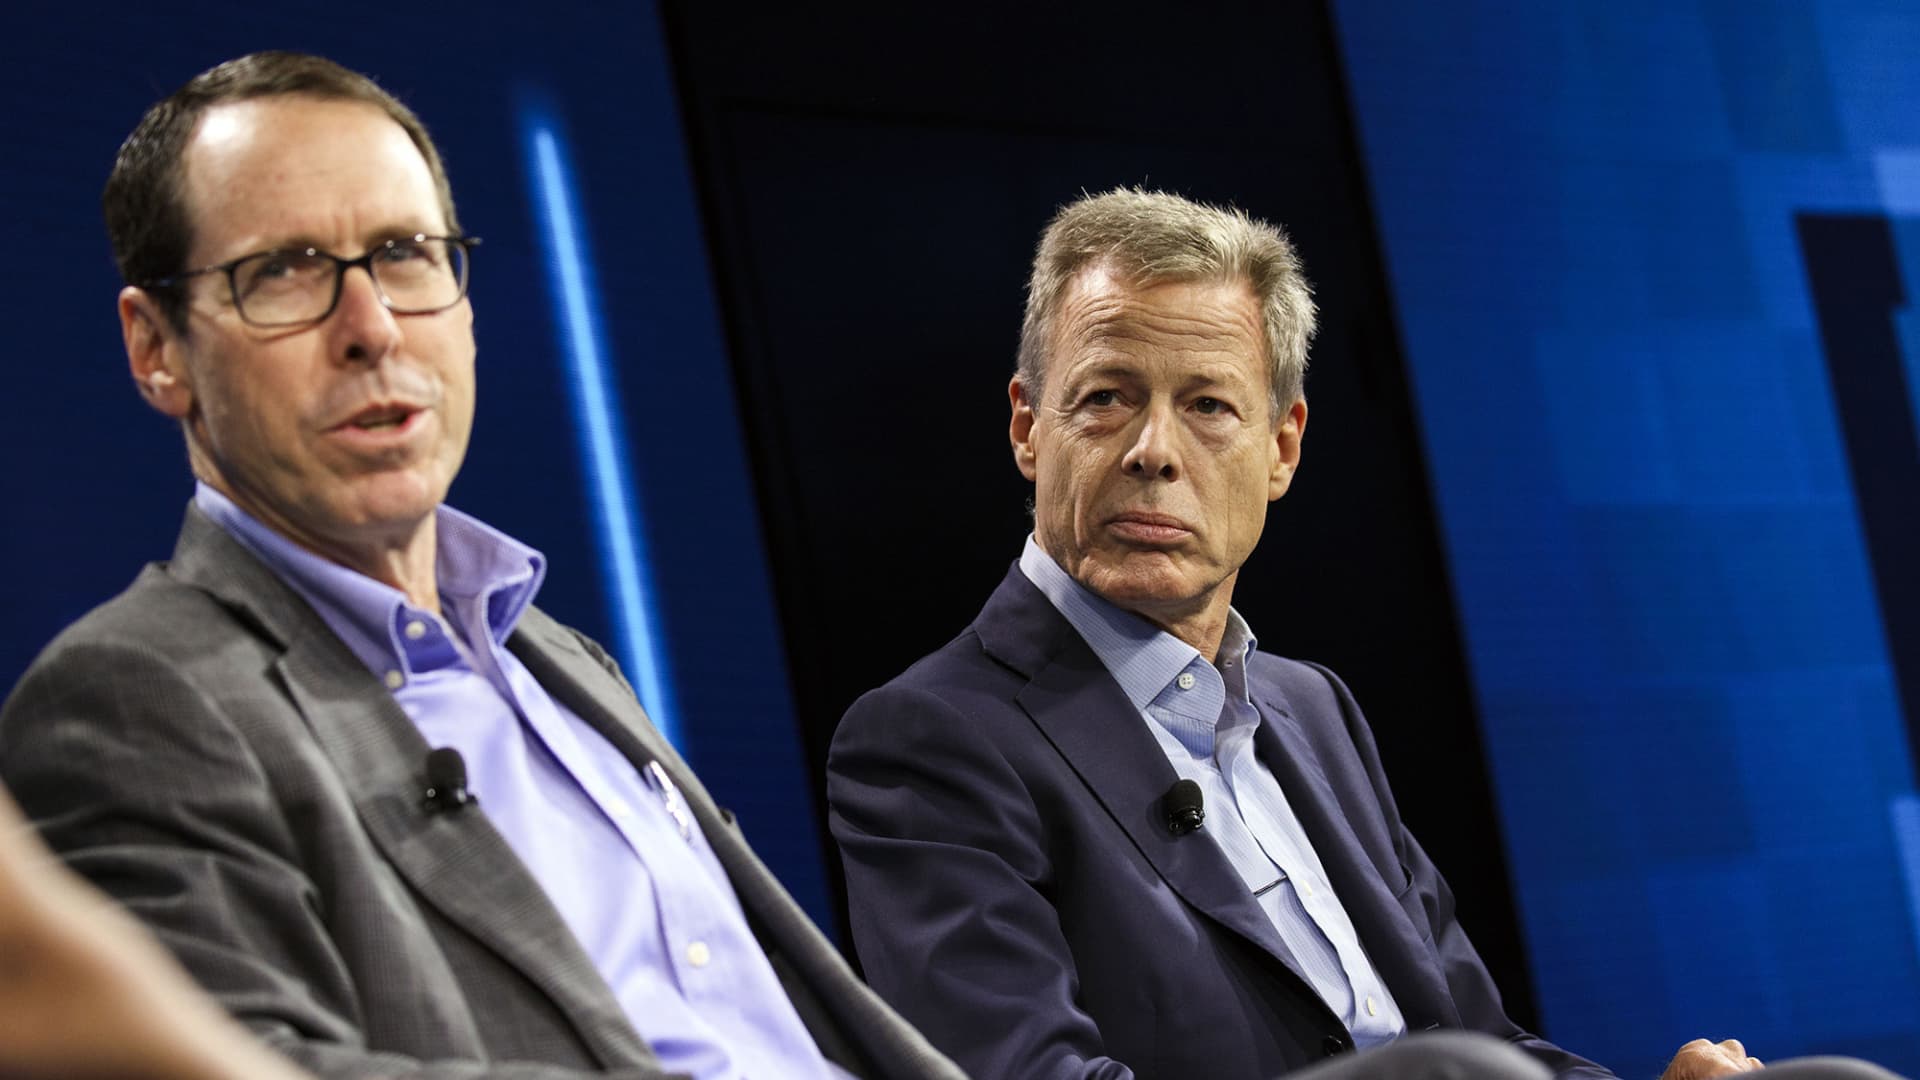 Randall Stephenson, then-chairman and chief executive officer of AT&T and Jeff Bewkes, then-chairman and chief executive officer of Time Warner, a few days after the AT&T acquisition of Warner was announced in October 2016.